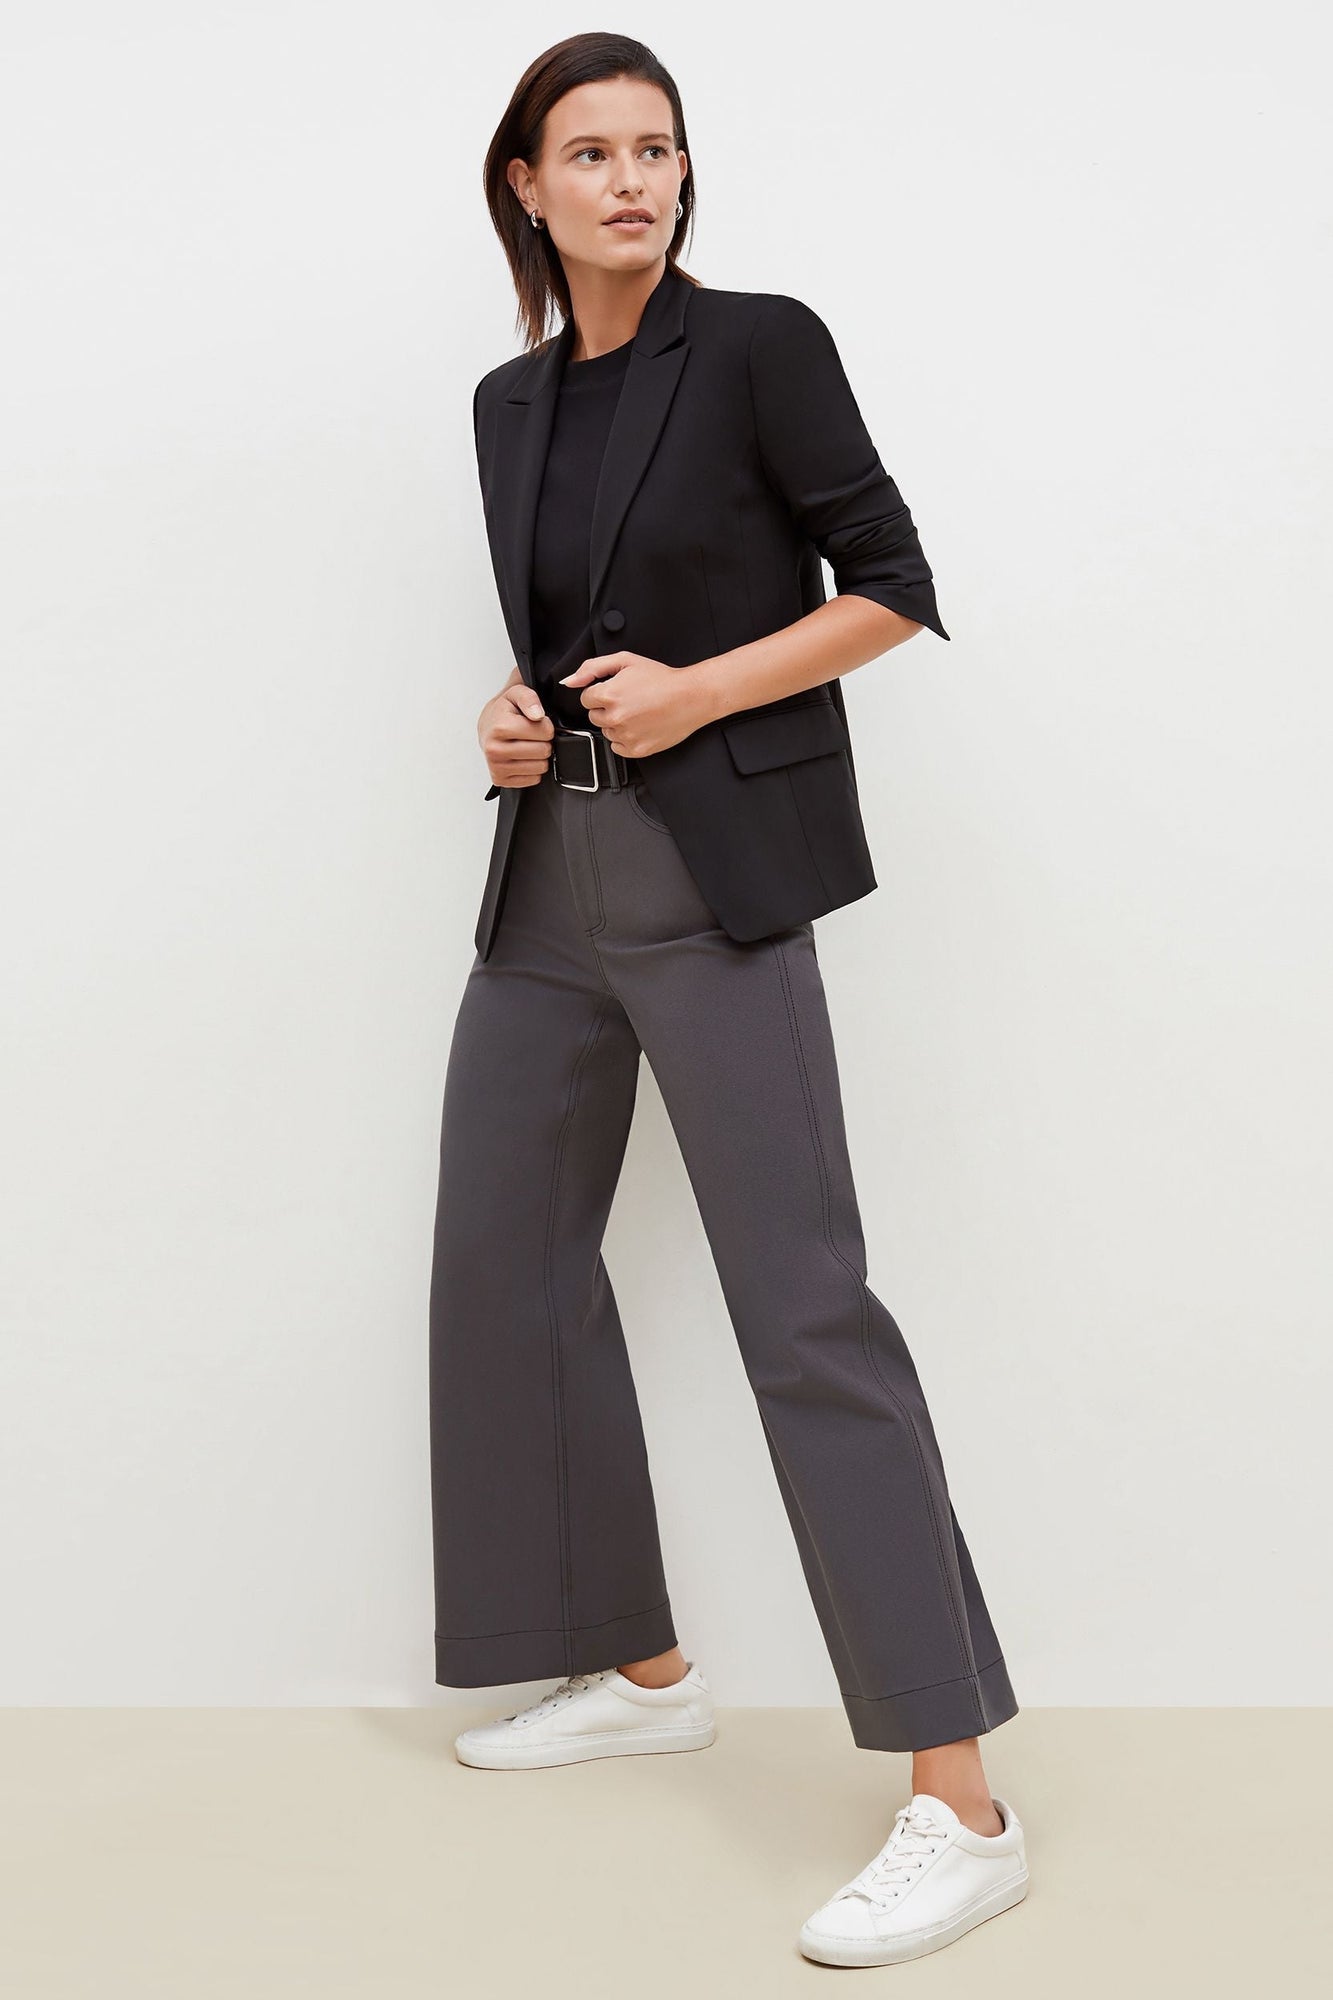 Side image of a woman standing wearing the bennett blazer wool twill in black | Grid Hover | Exclude